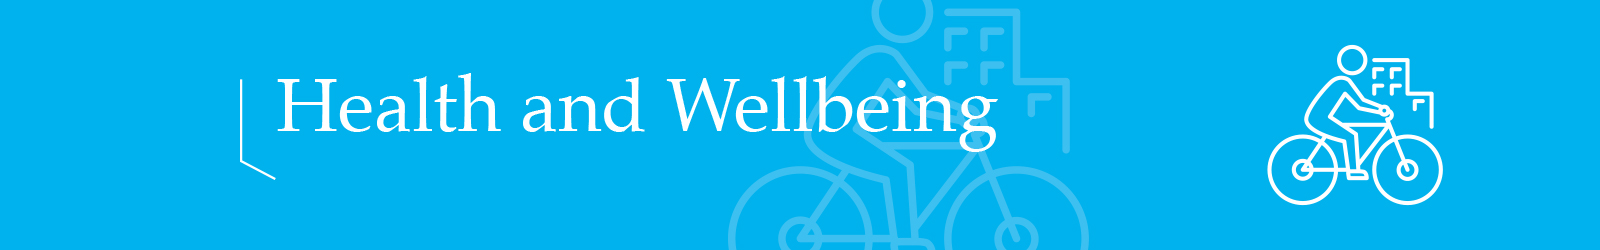 Health and Wellbeing Strategy